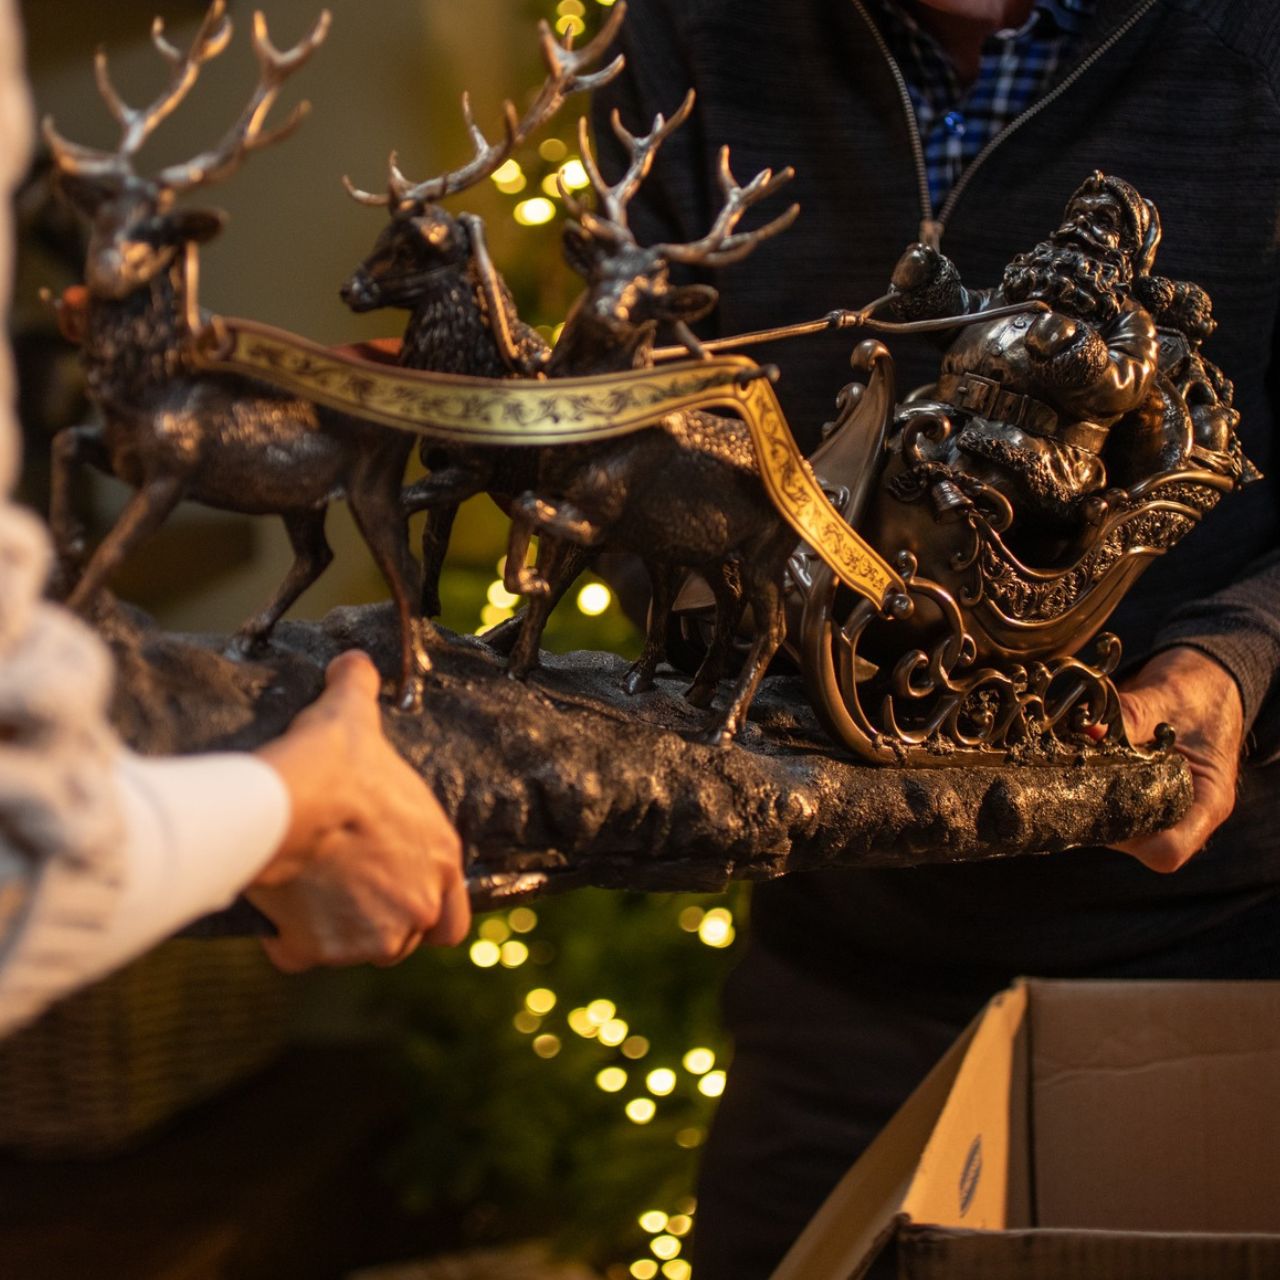 Santa on Sleigh by Genesis  Beautifully crafted from cast bronze and handcrafted, this Santa on Sleigh sculpture will make a beautiful addition to your home during the holidays. Intricately detailed, this Santa Claus features three reindeer's pulling his sleigh.